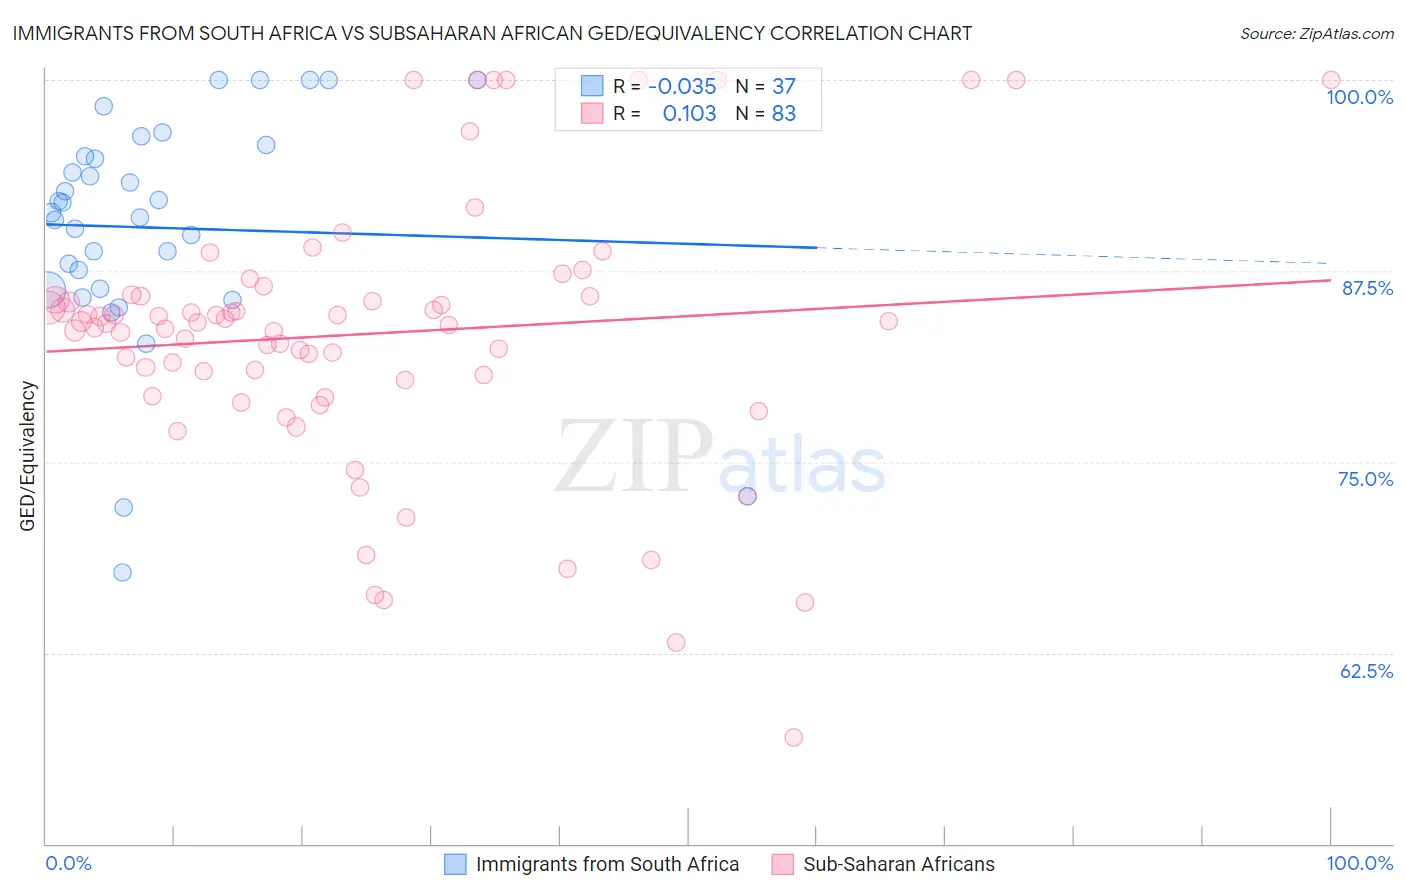 Immigrants from South Africa vs Subsaharan African GED/Equivalency